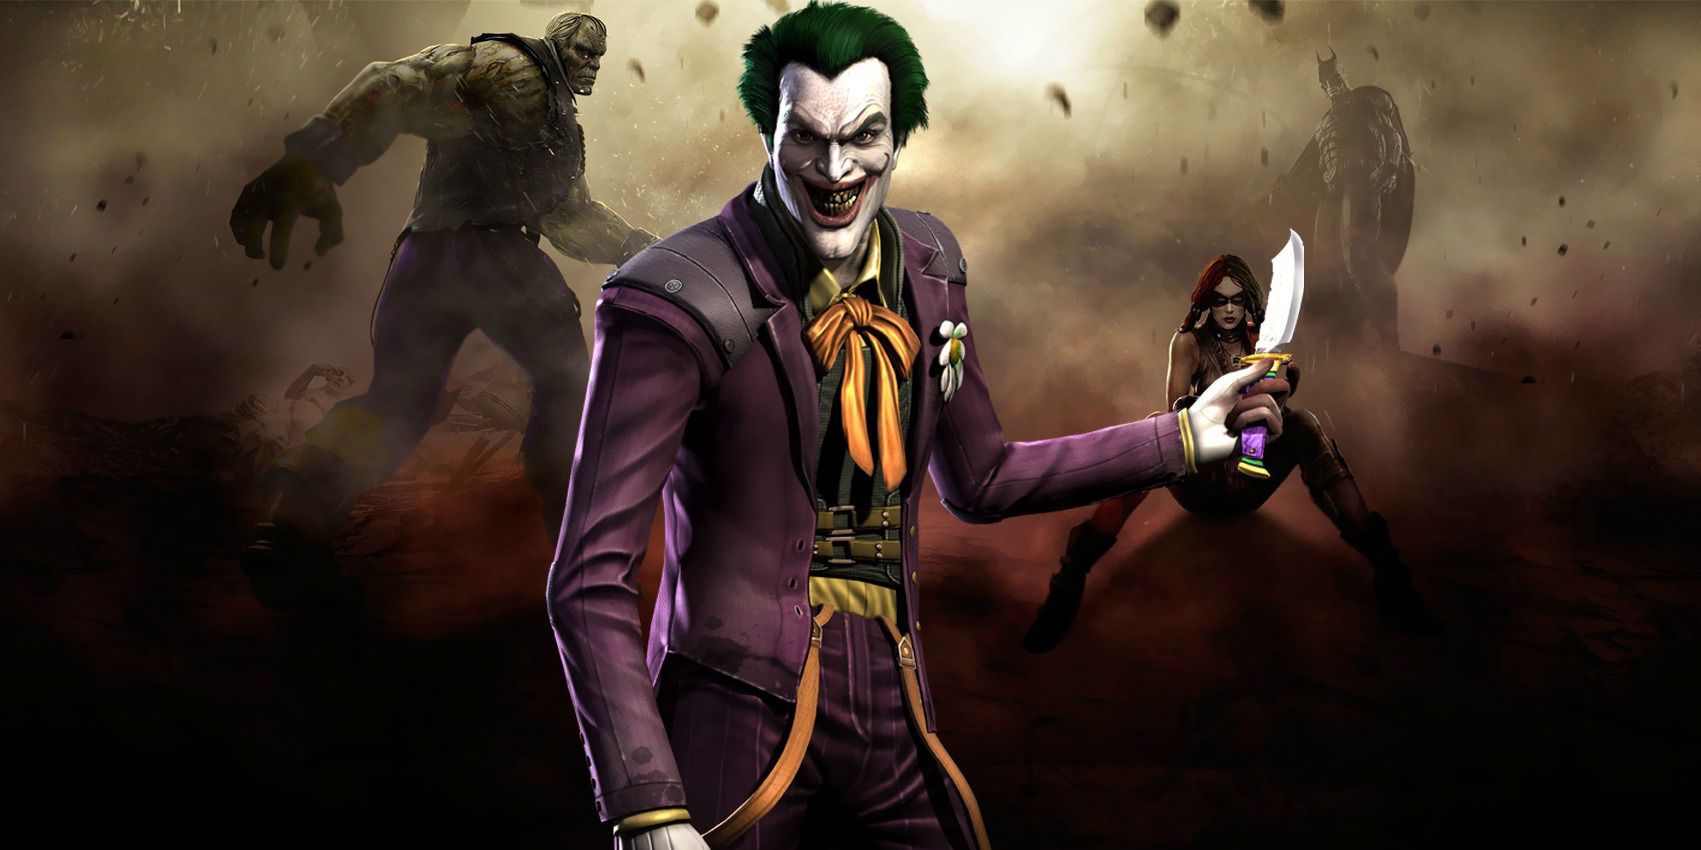 The Joker in Injustice Gods Among Us